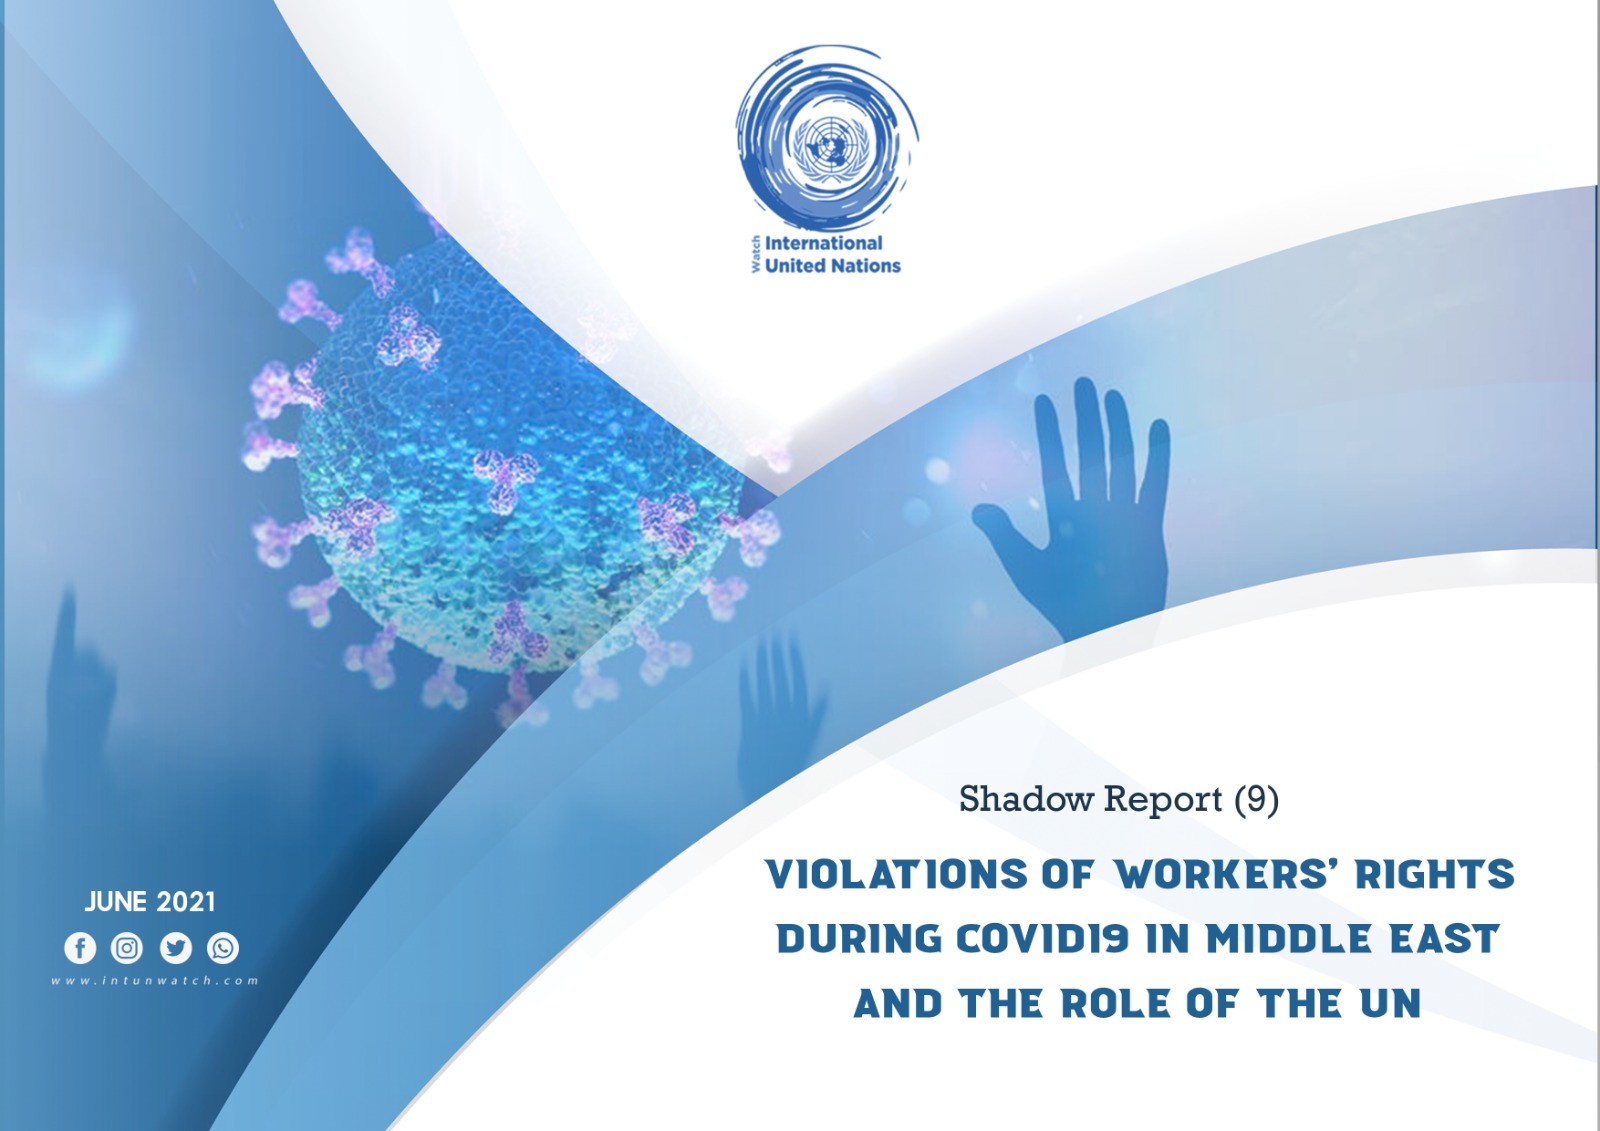  Report (9): Violations of Workers’ Rights During COVID19 in Middle East and the Role of the UN